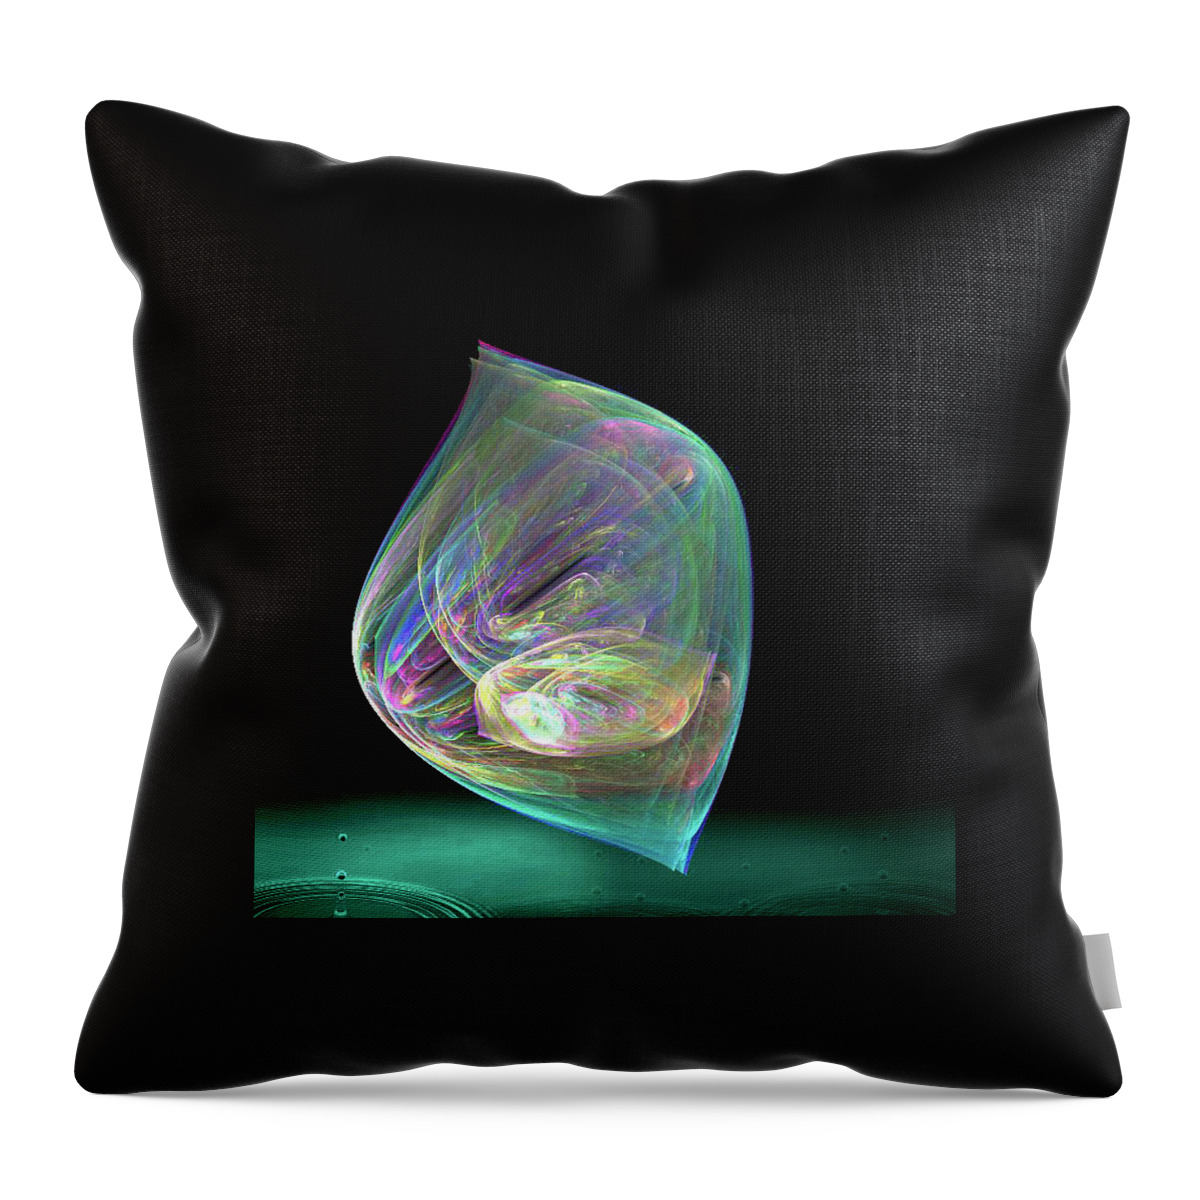 Space Throw Pillow featuring the digital art Bubbles by Kelly Dallas